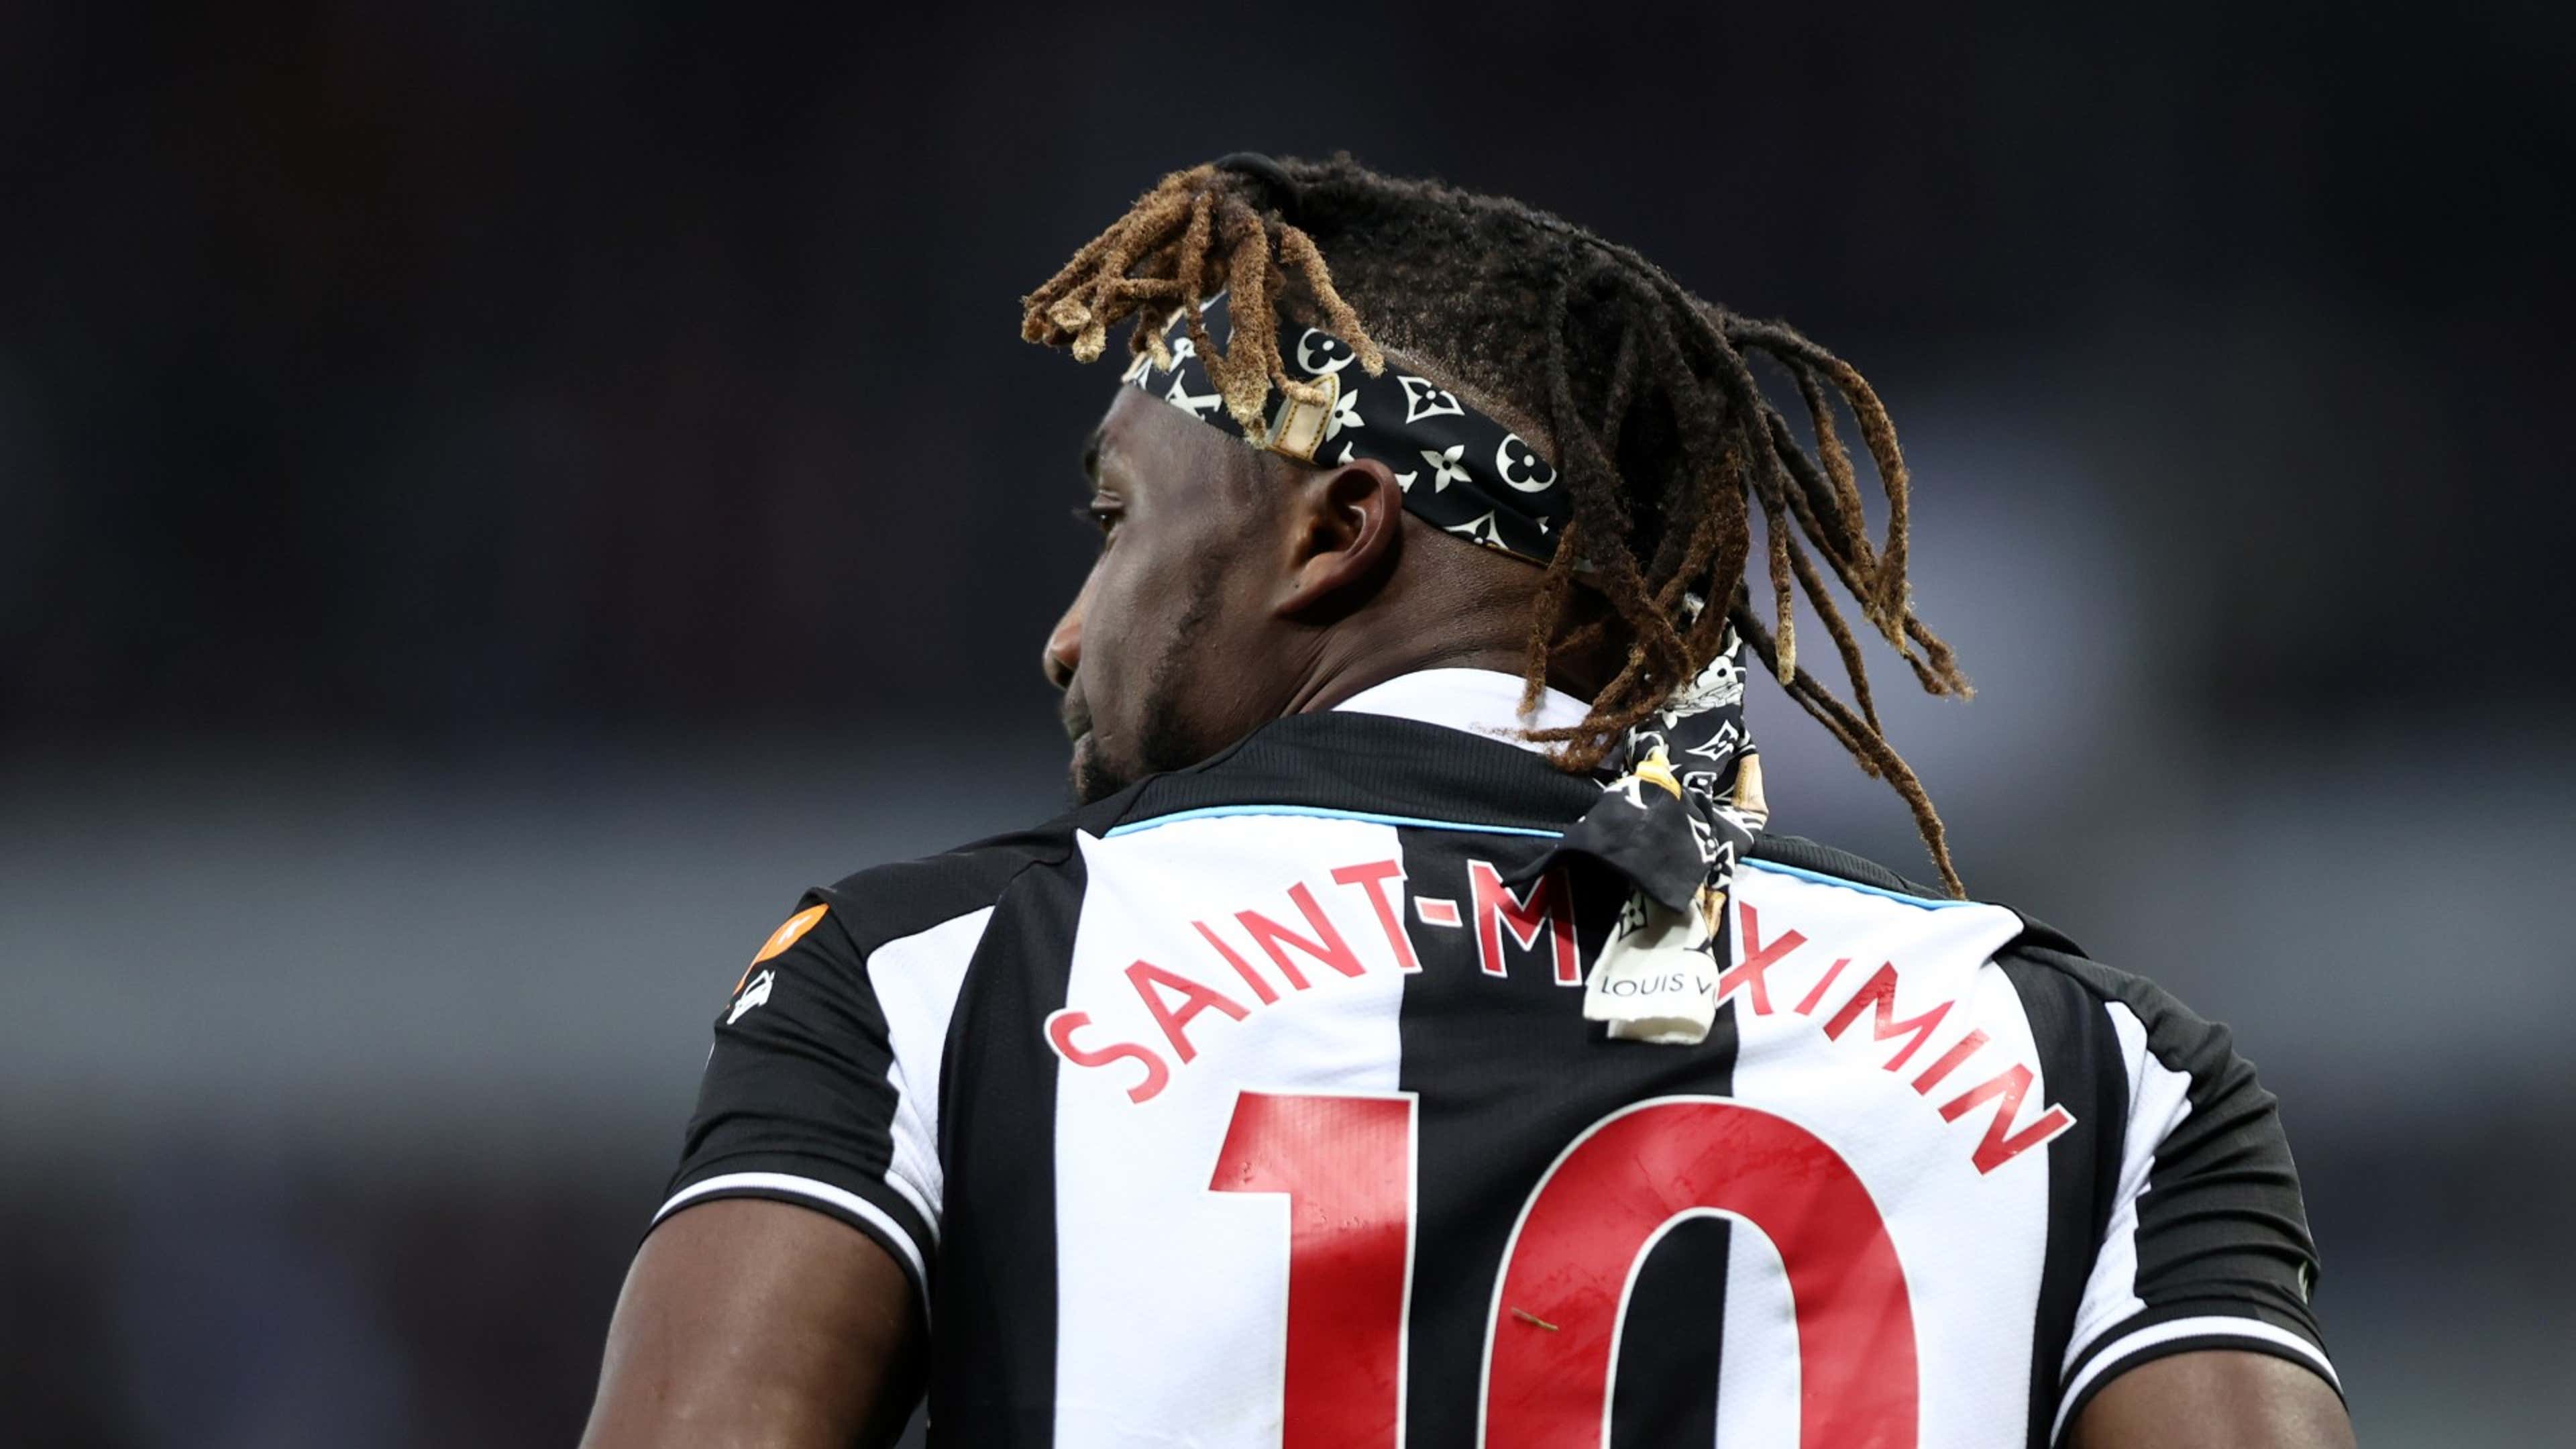 Newcastle star Saint-Maximin charged by FA for wearing Louis